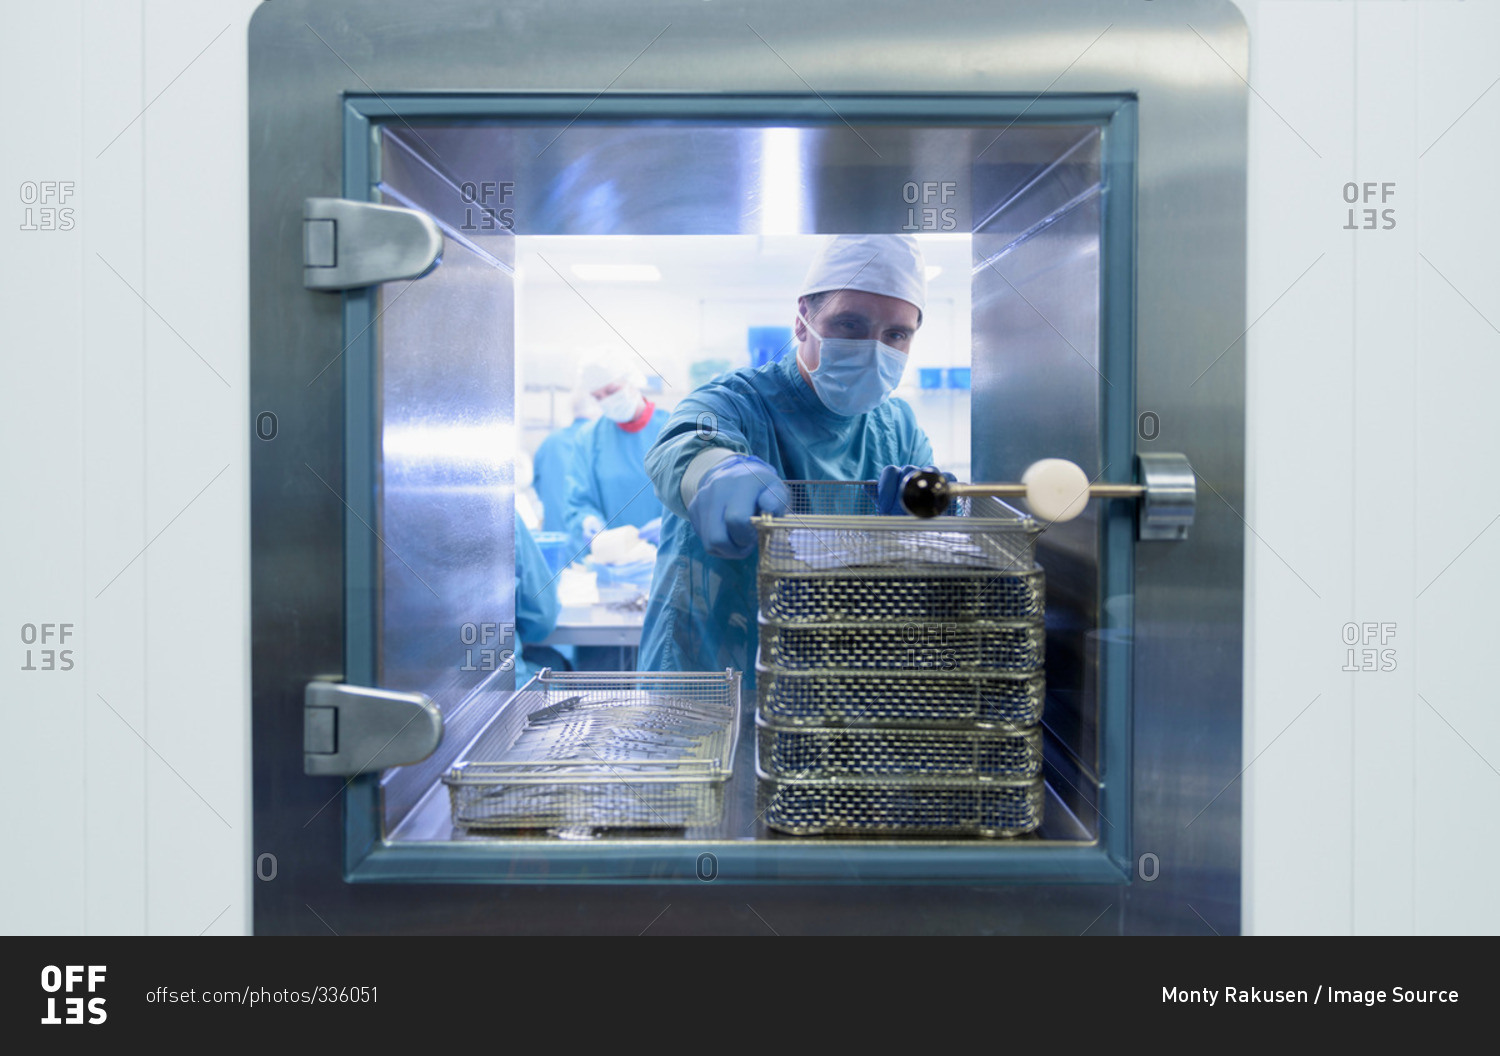 Worker putting surgical instruments into air lock in clean room of surgical instruments factory